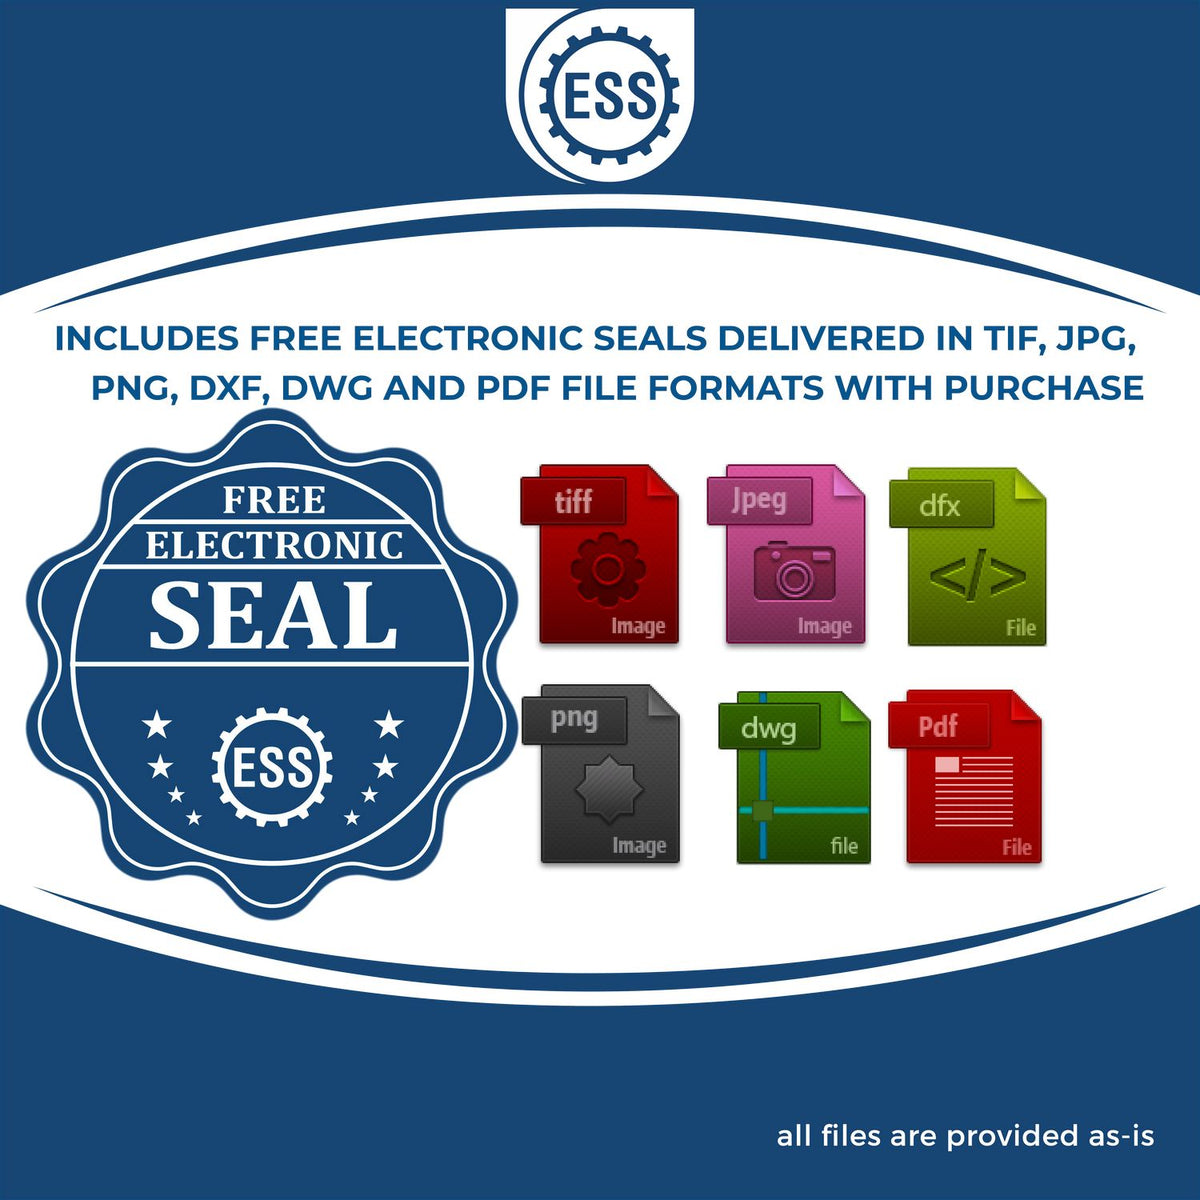 An infographic for the free electronic seal for the Hybrid Utah Geologist Seal illustrating the different file type icons such as DXF, DWG, TIF, JPG and PNG.